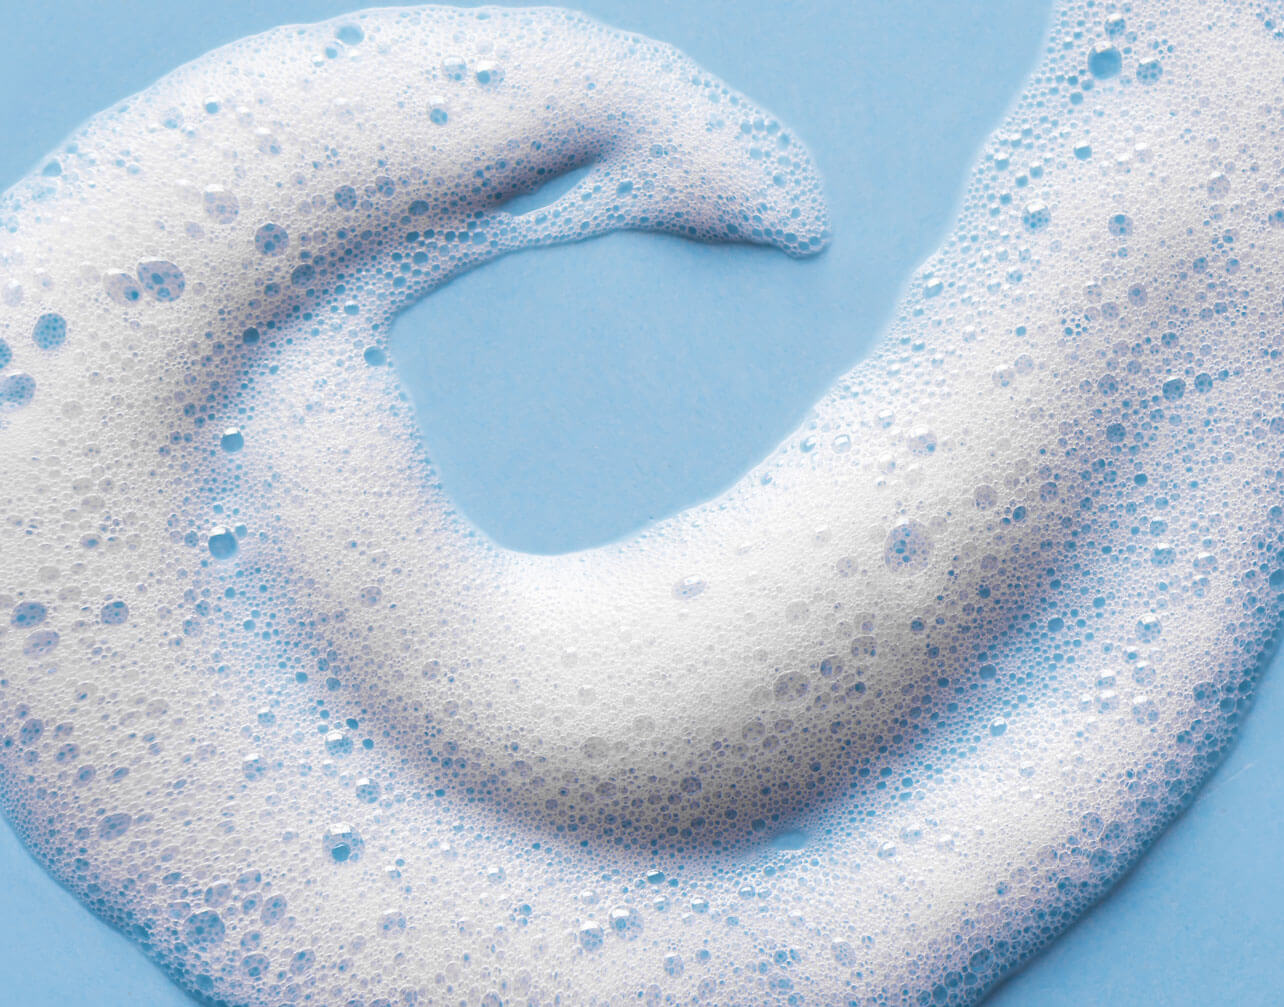 bubbly hair care product on blue background